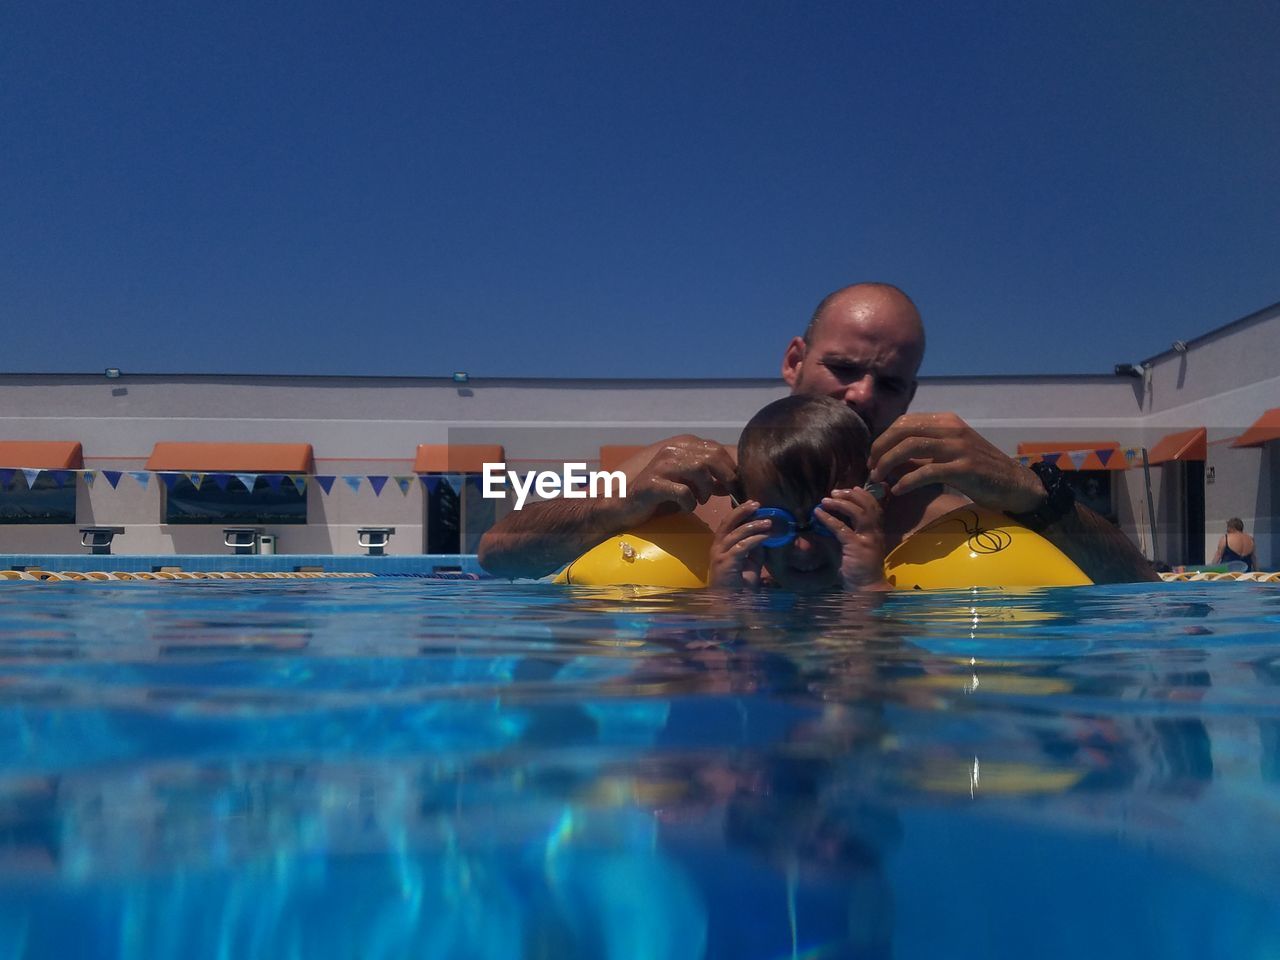 Father and son swimming in pool against clear blue sky